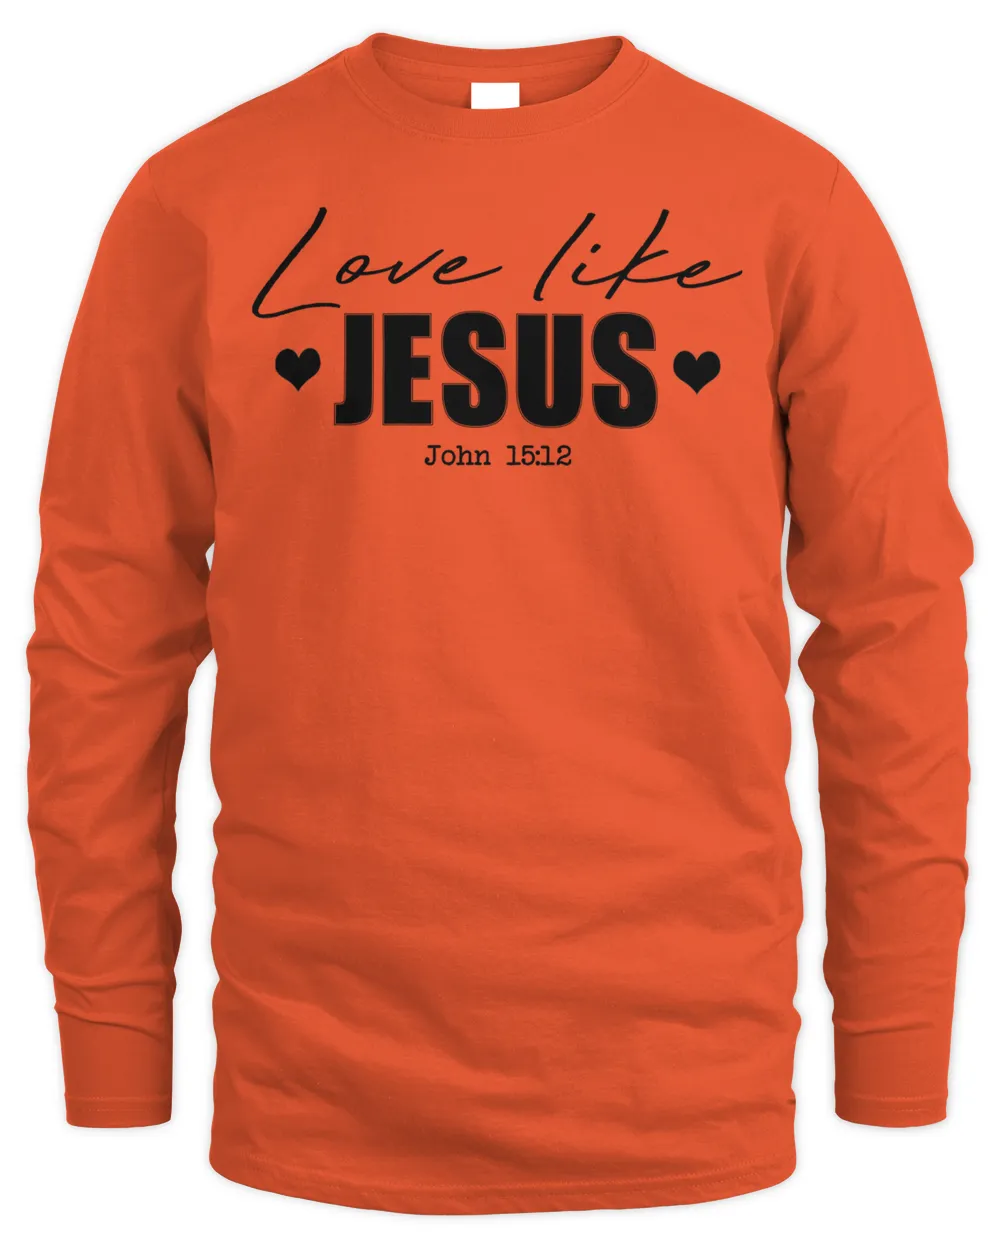 Love Like Jesus t-Shirt, Dear Person Behind me, Christian Shirt, Jesus Love You Beyond Measure, Gift for her t-Shirt, Front and Back